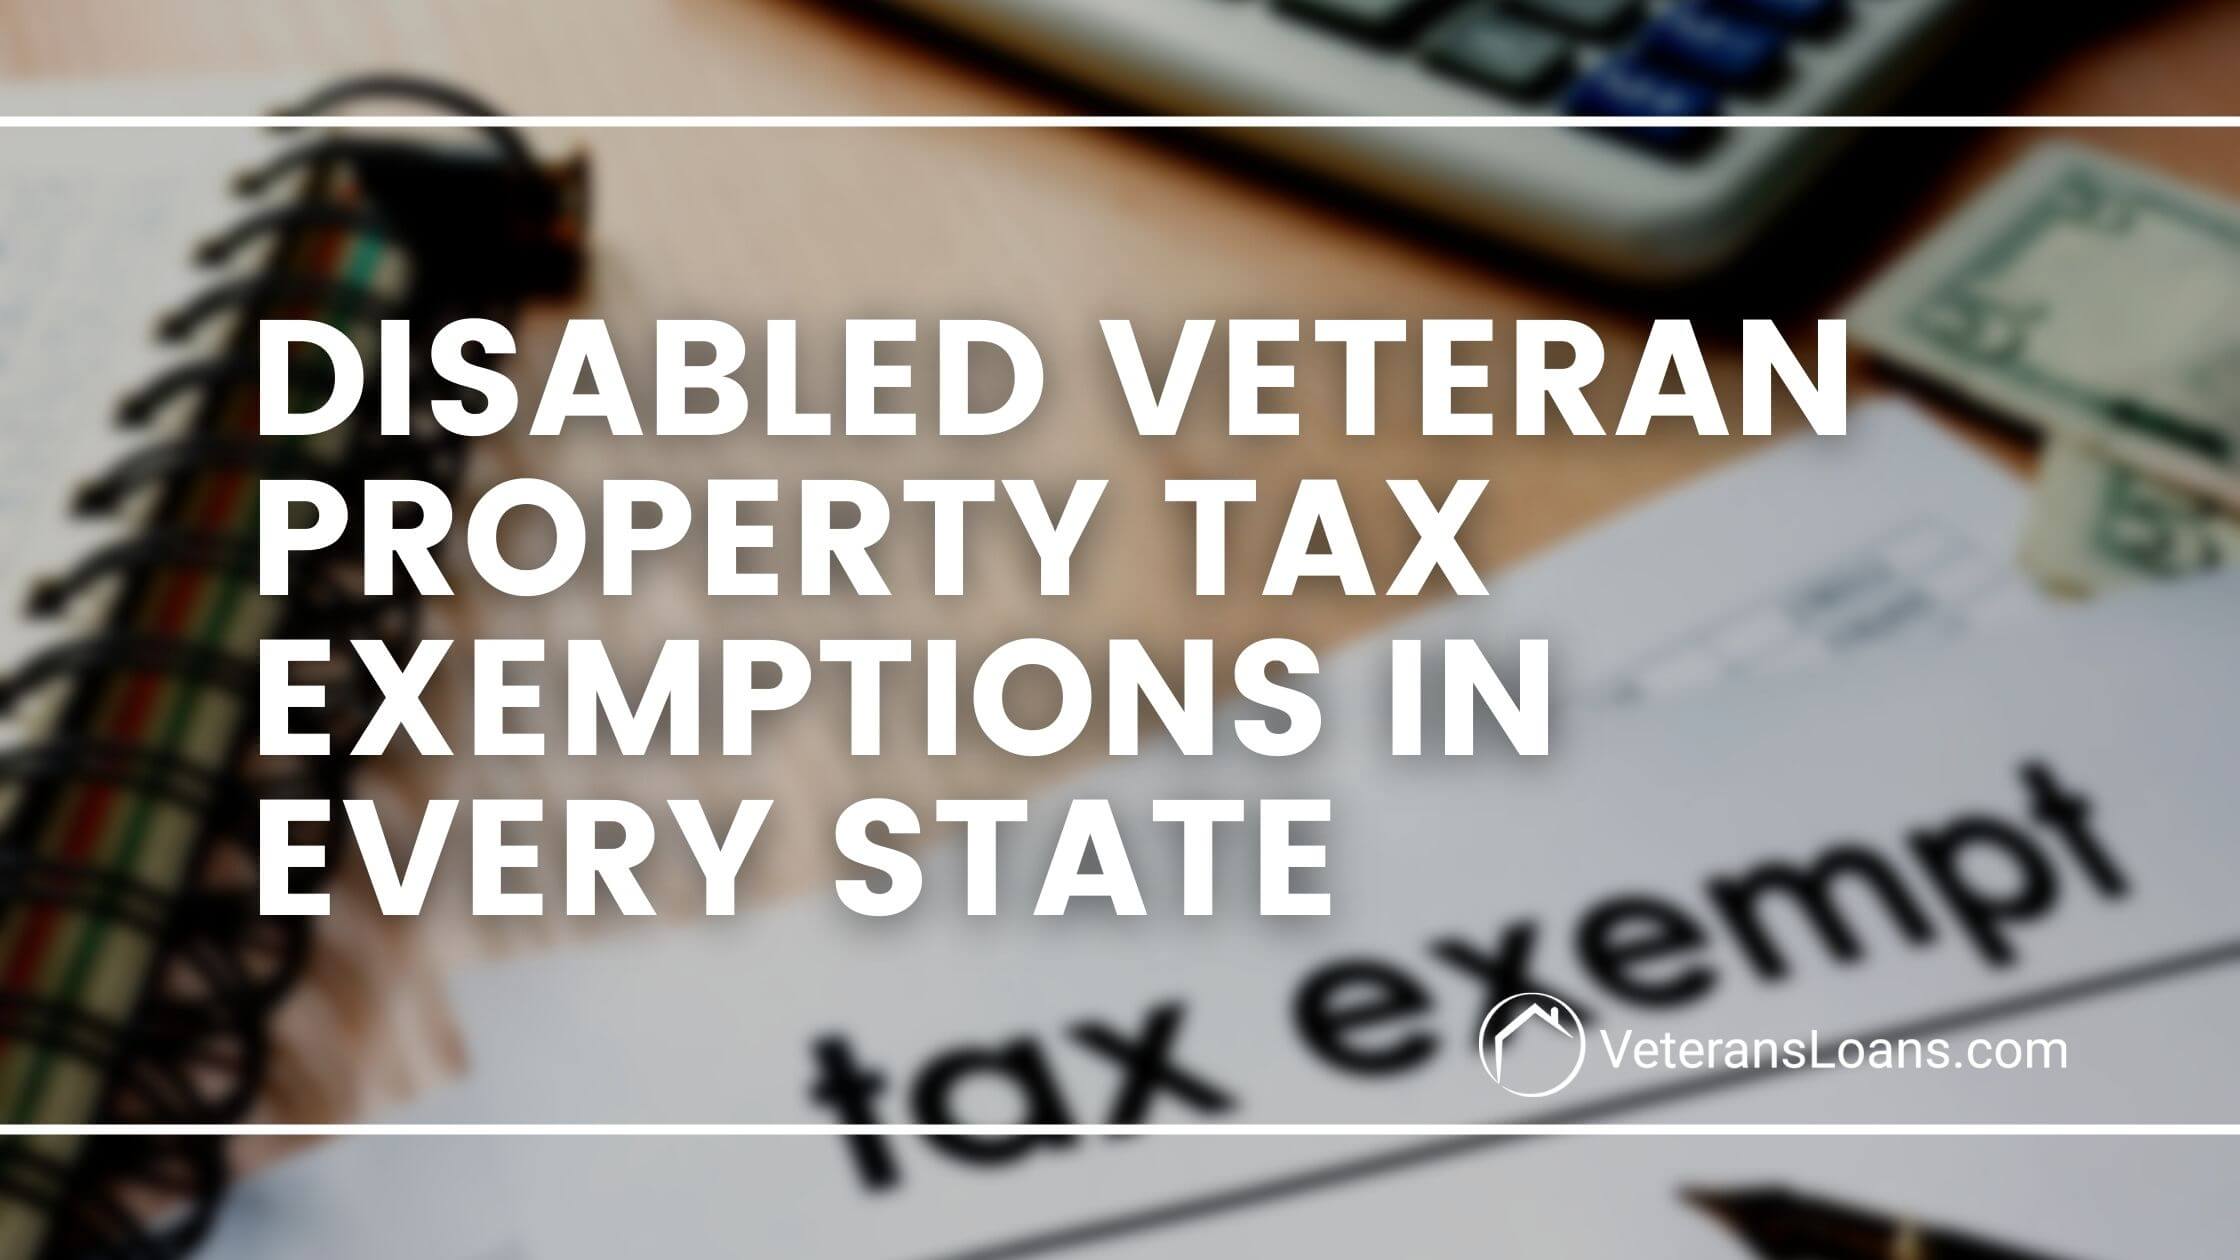 Disabled Veteran Property Tax Exemption in Every State